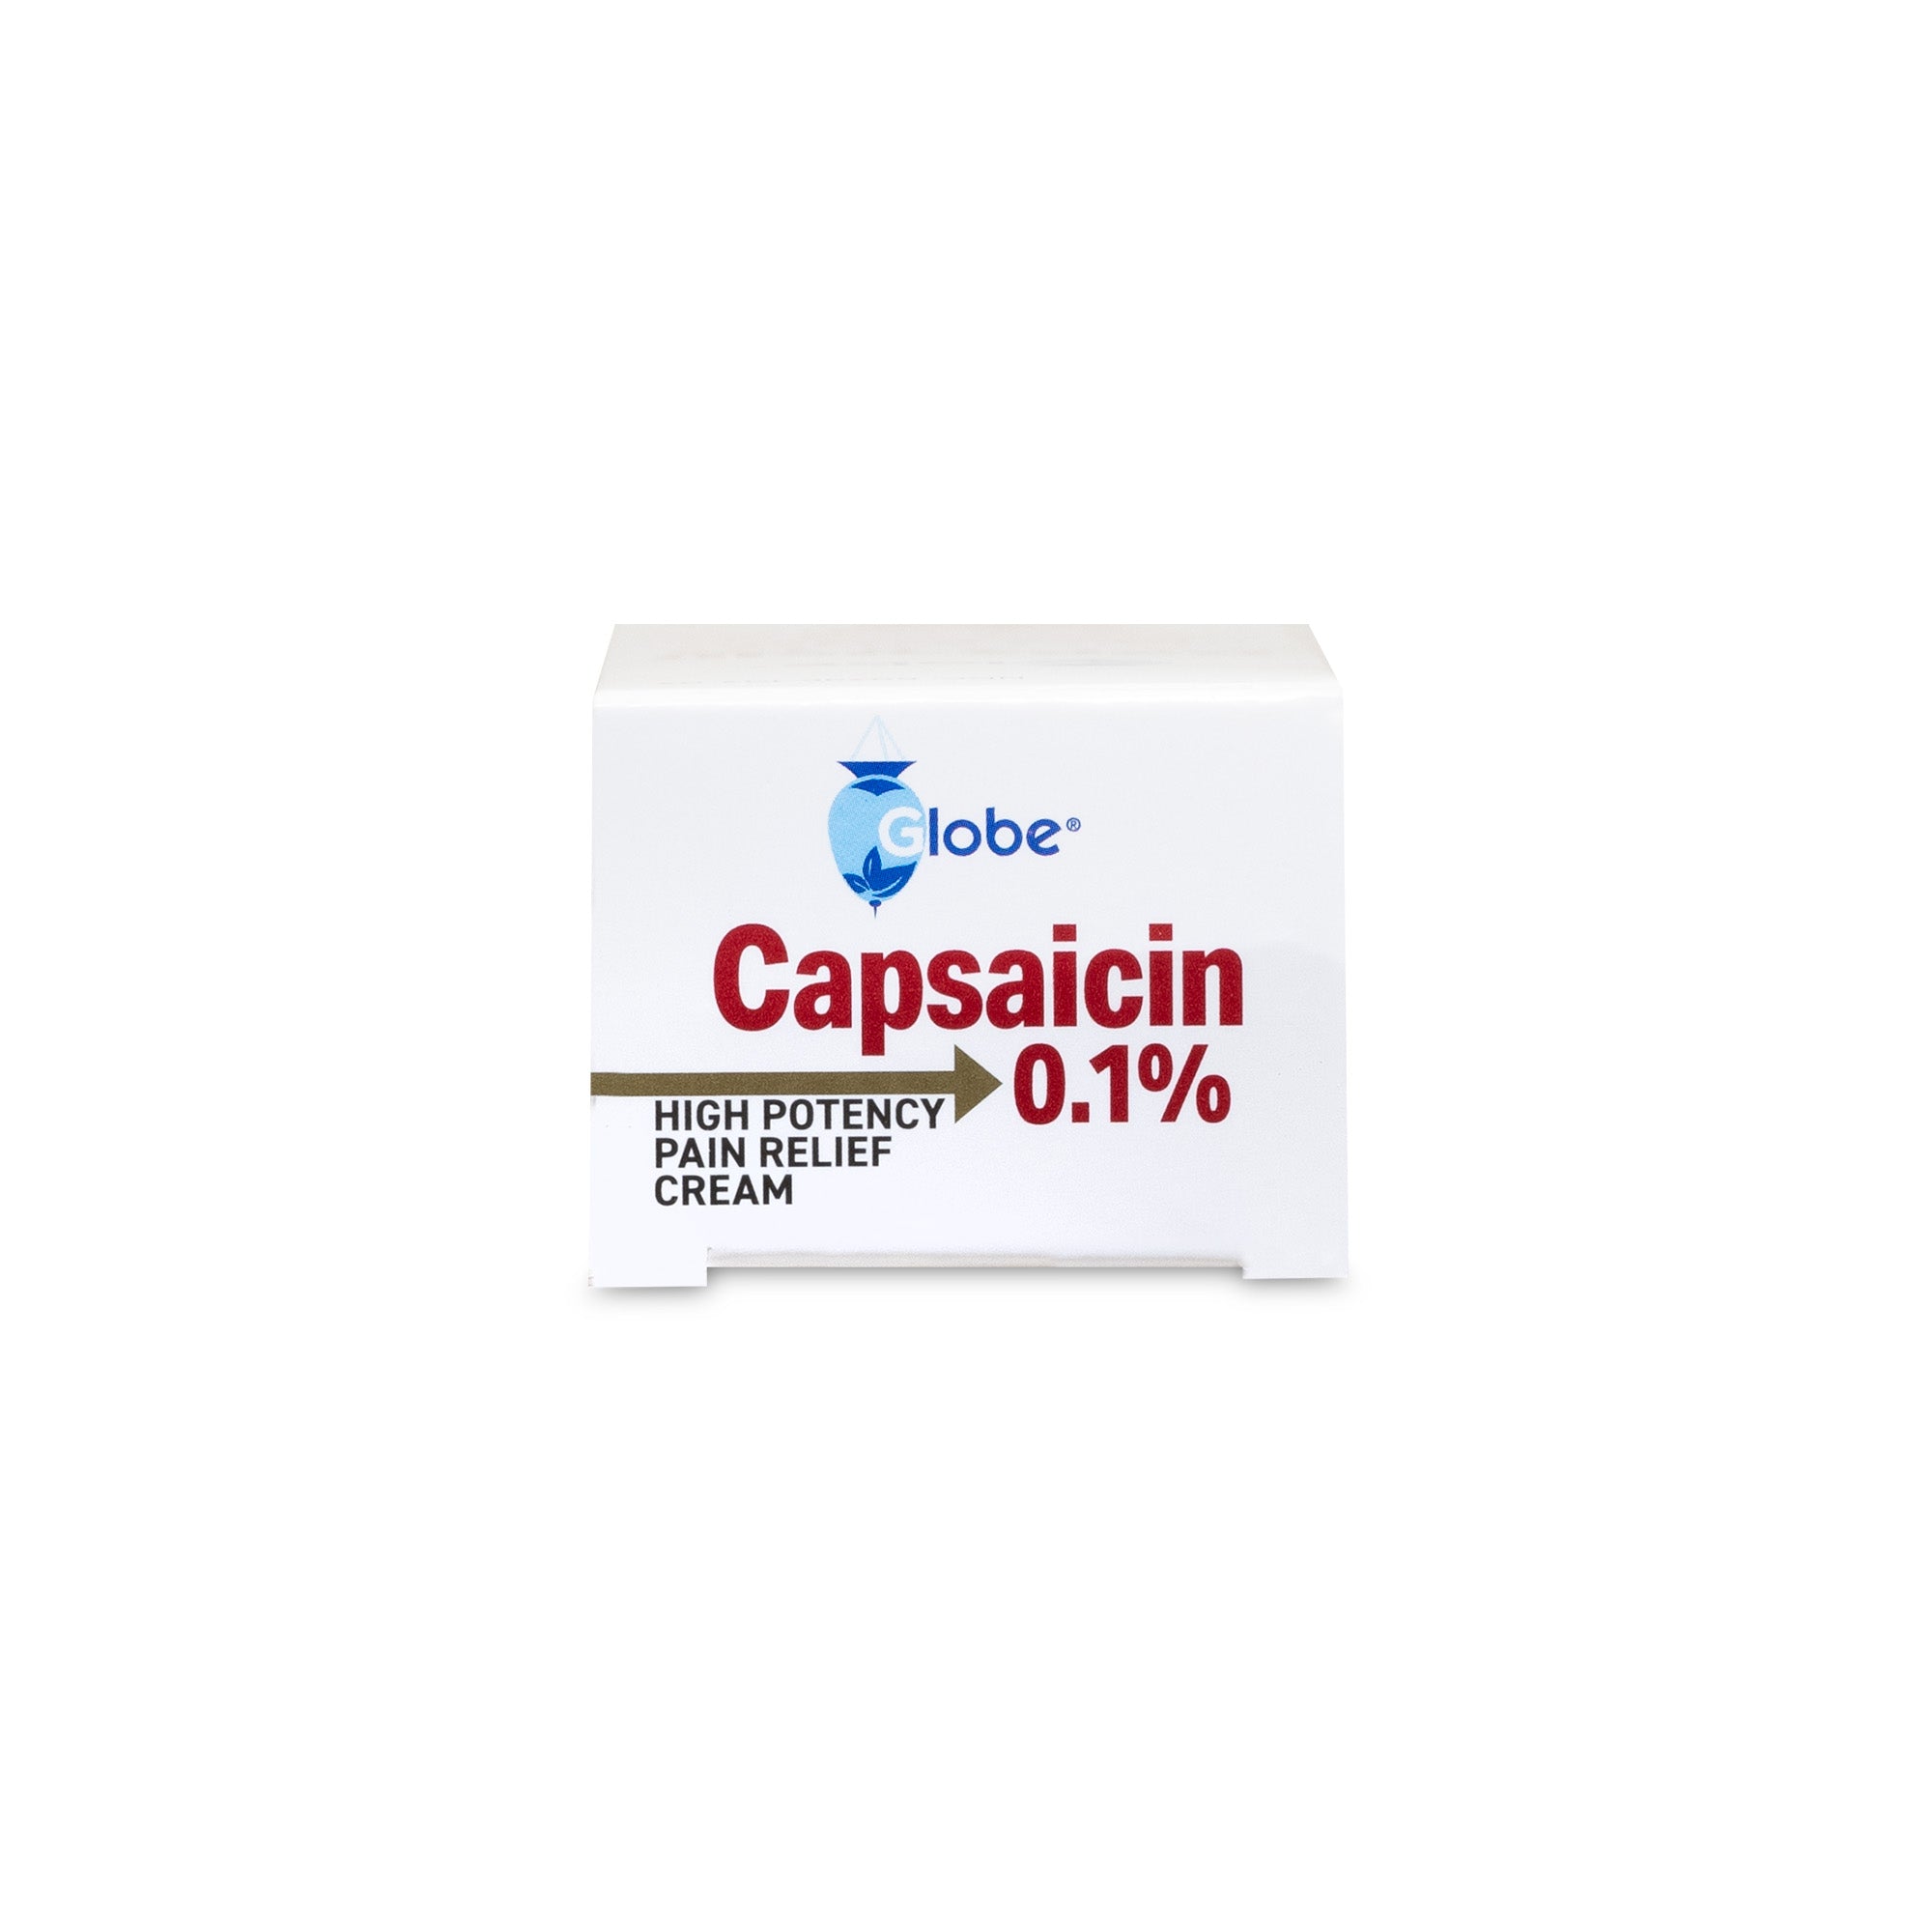 Globe Capsaicin 0.1% High Potency Pain Relief Cream (2 oz). Deep Penetrating Relief from: Arthritis, Muscle, Joint and Back Pain